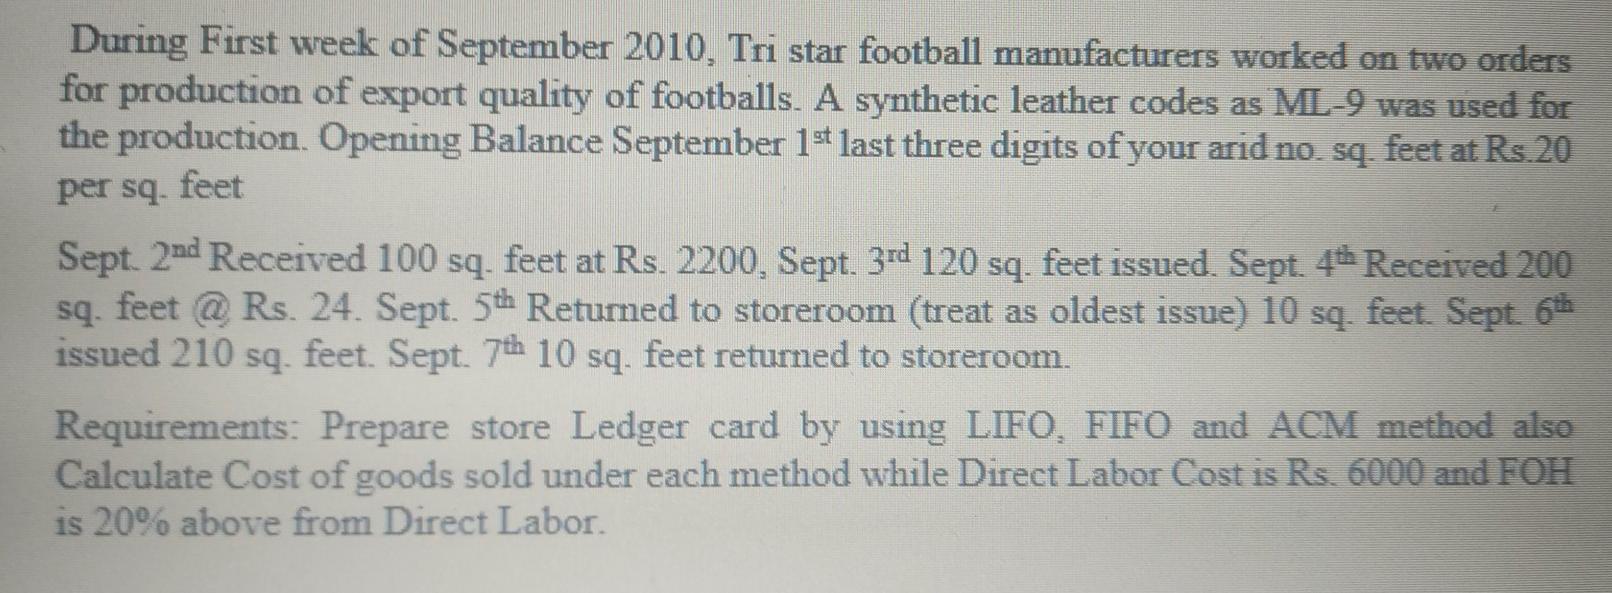 During First week of September 2010, Tri star football manufacturers worked on two orders for production of export quality of